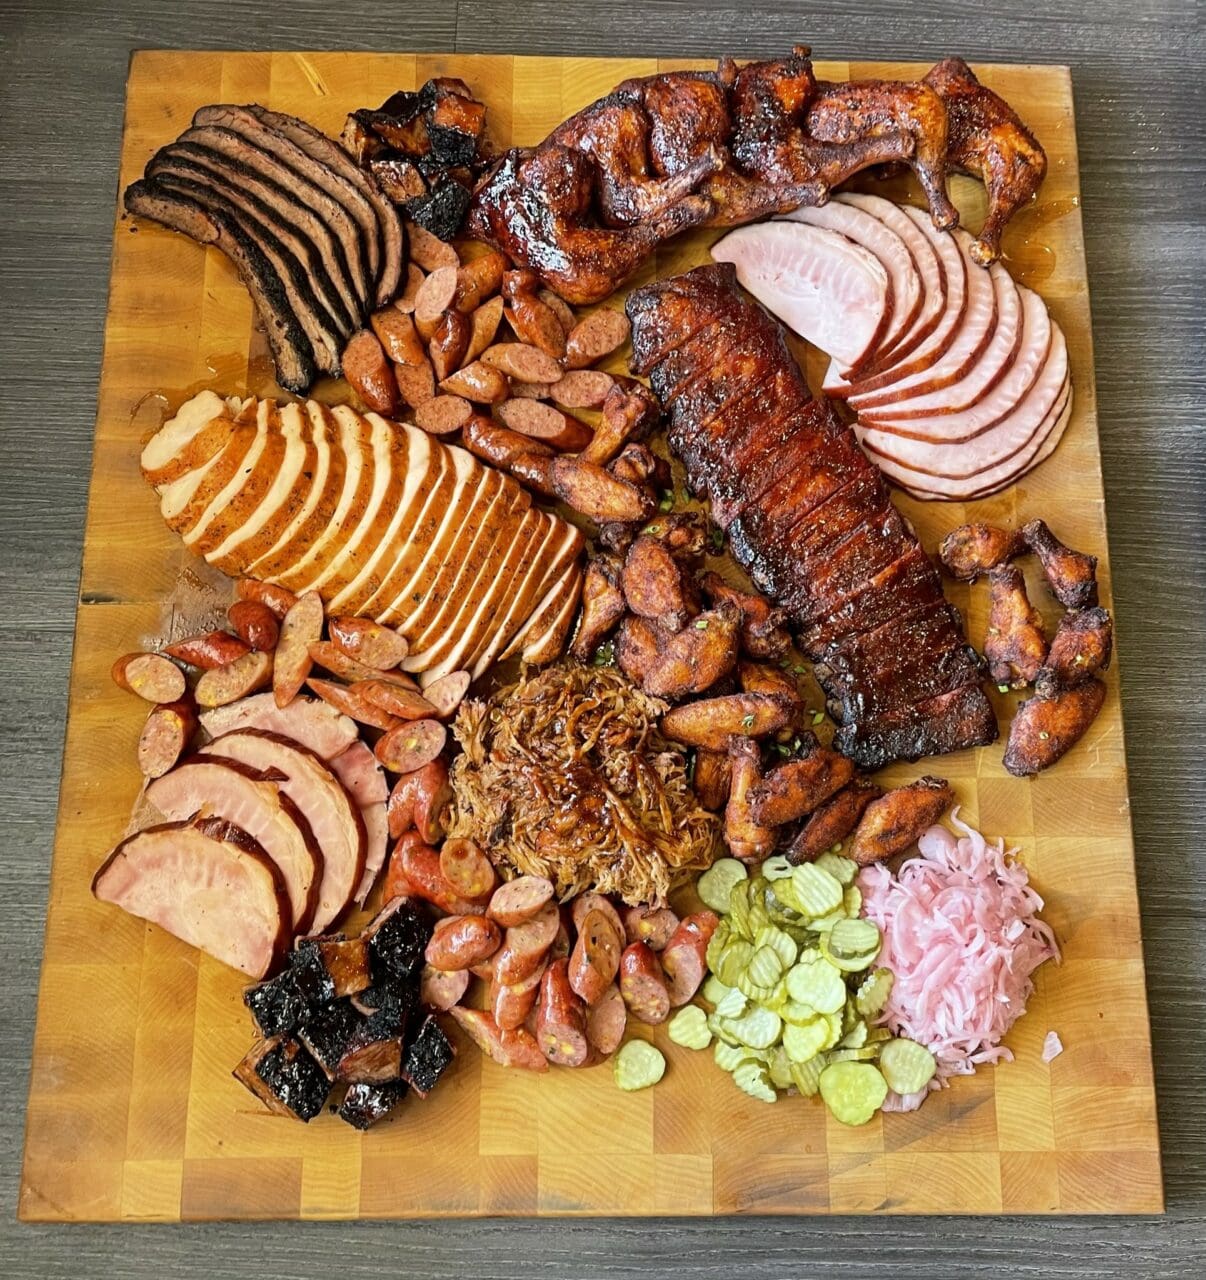 a butcher block full of smoked meats and bbq